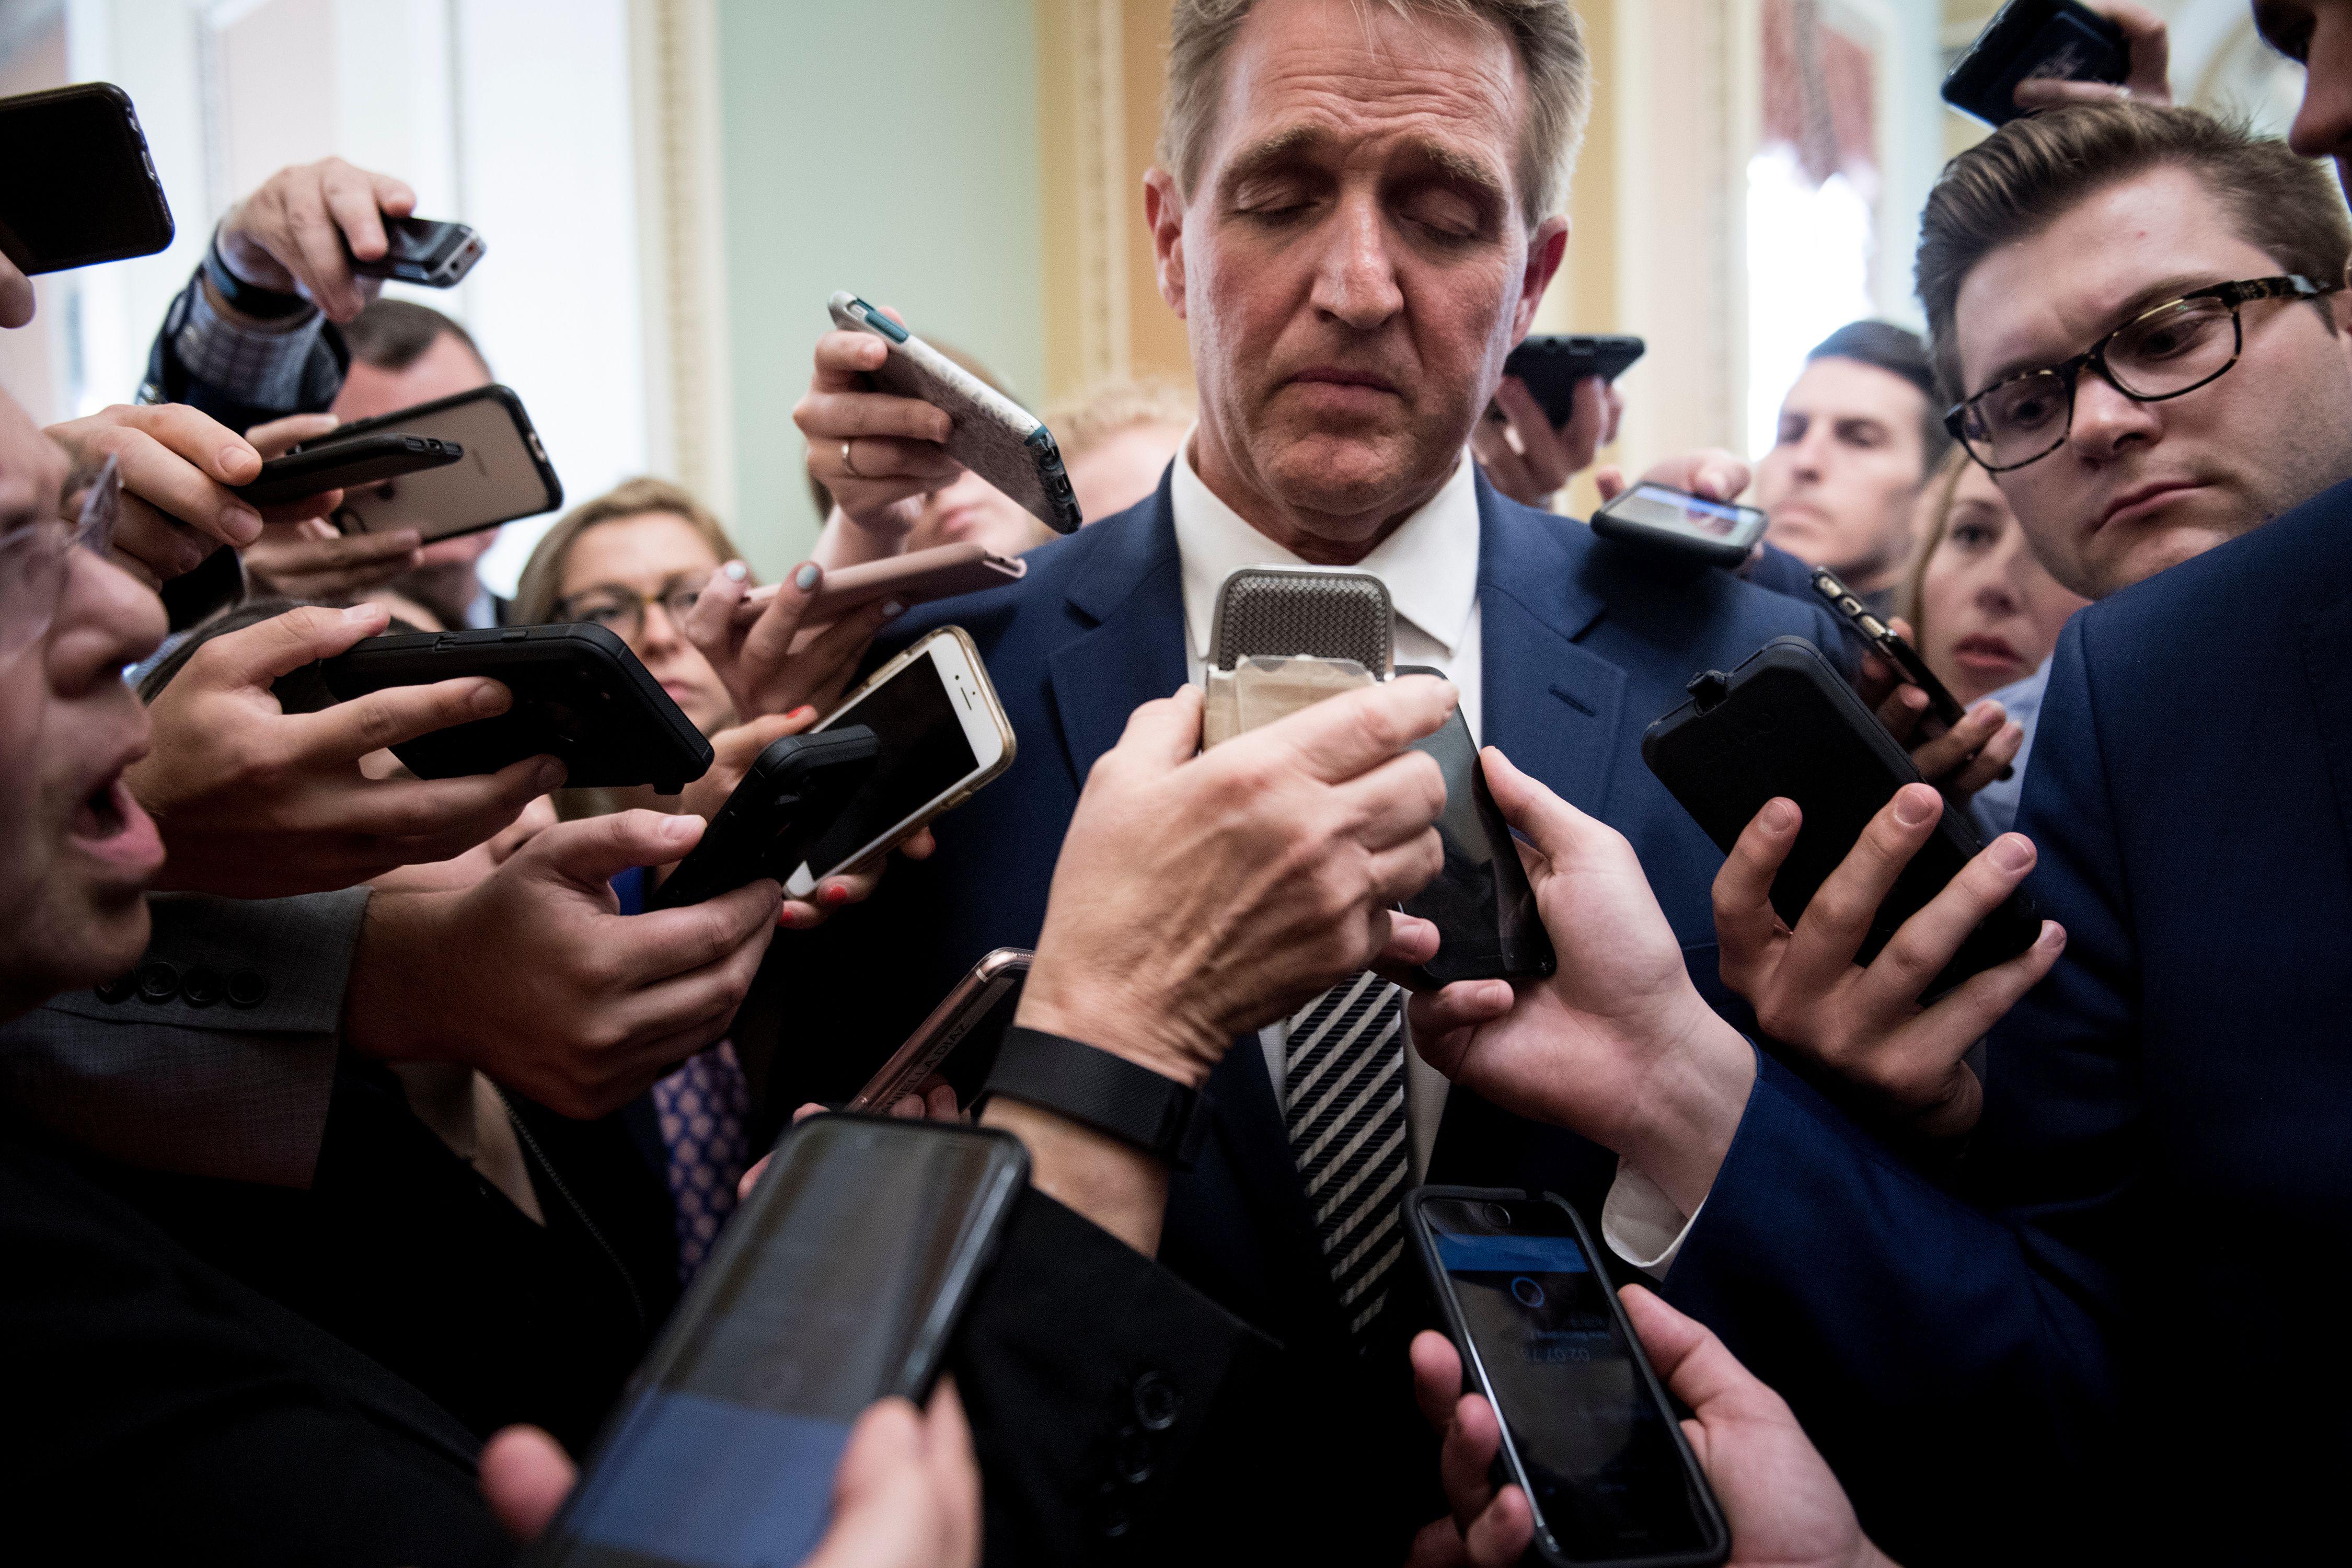 Senator Jeff Flake speaks with reporters after a meeting with Senate Majority Leader Senator Mitch McConnell about the Judge Brett Kavanaugh nomination on Capitol Hill on September 28, 2018 in Washington, DC. 